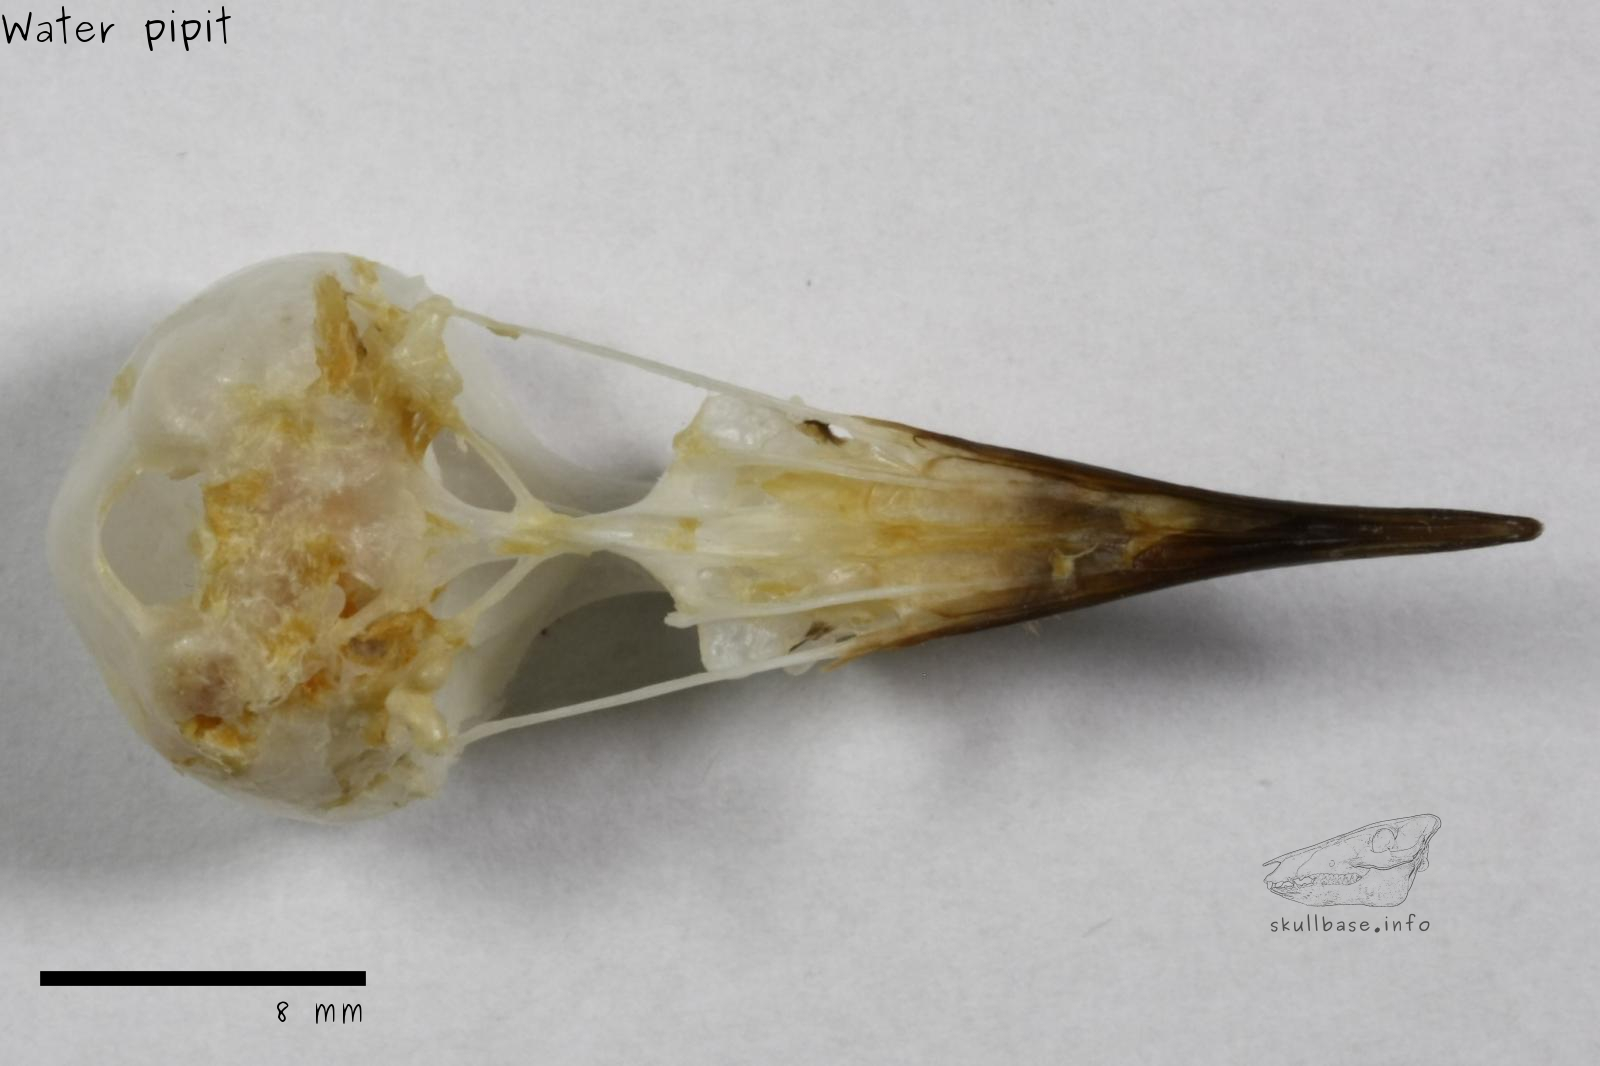 Water pipit (Anthus spinoletta) skull ventral view